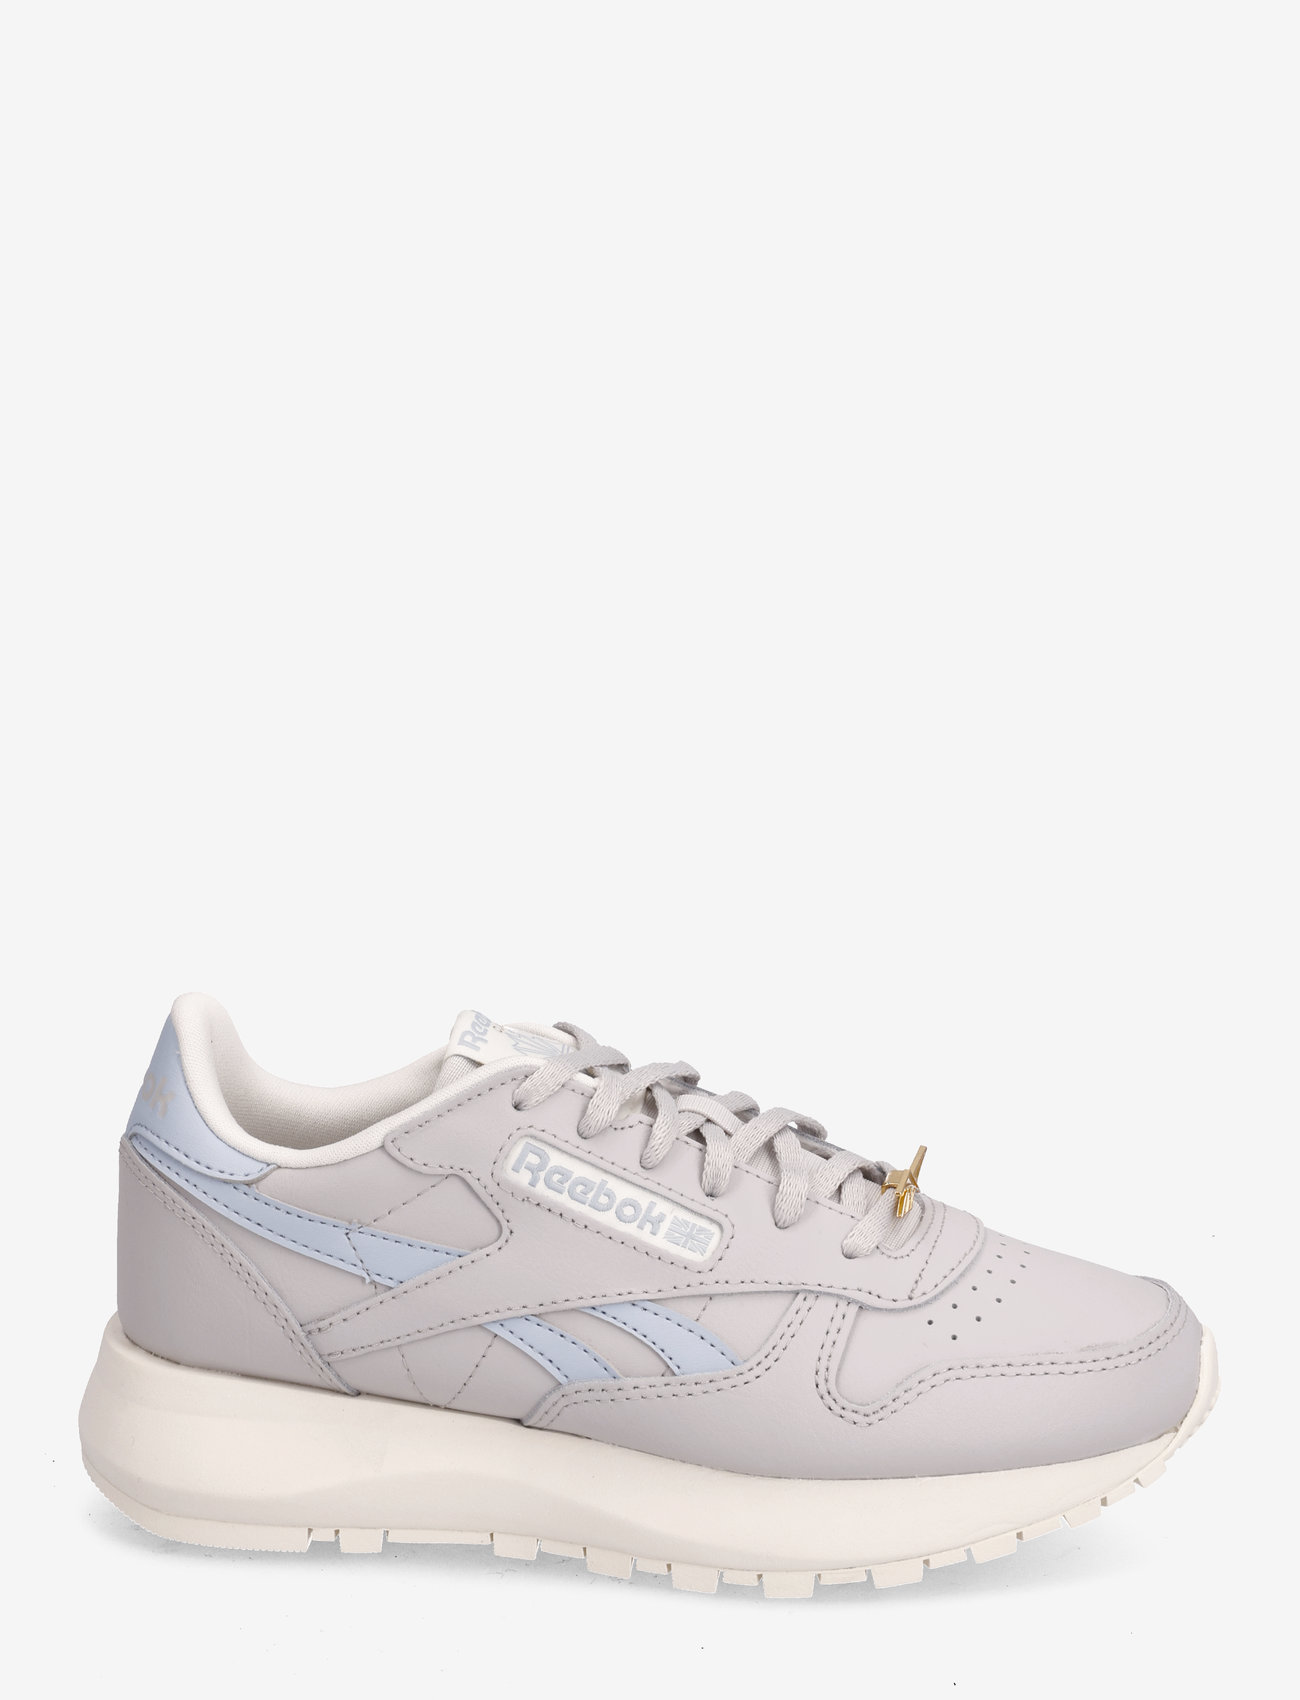 Reebok Classics - CLASSIC LEATHER SP - low top sneakers - stefog/gabgry/chalk - 1